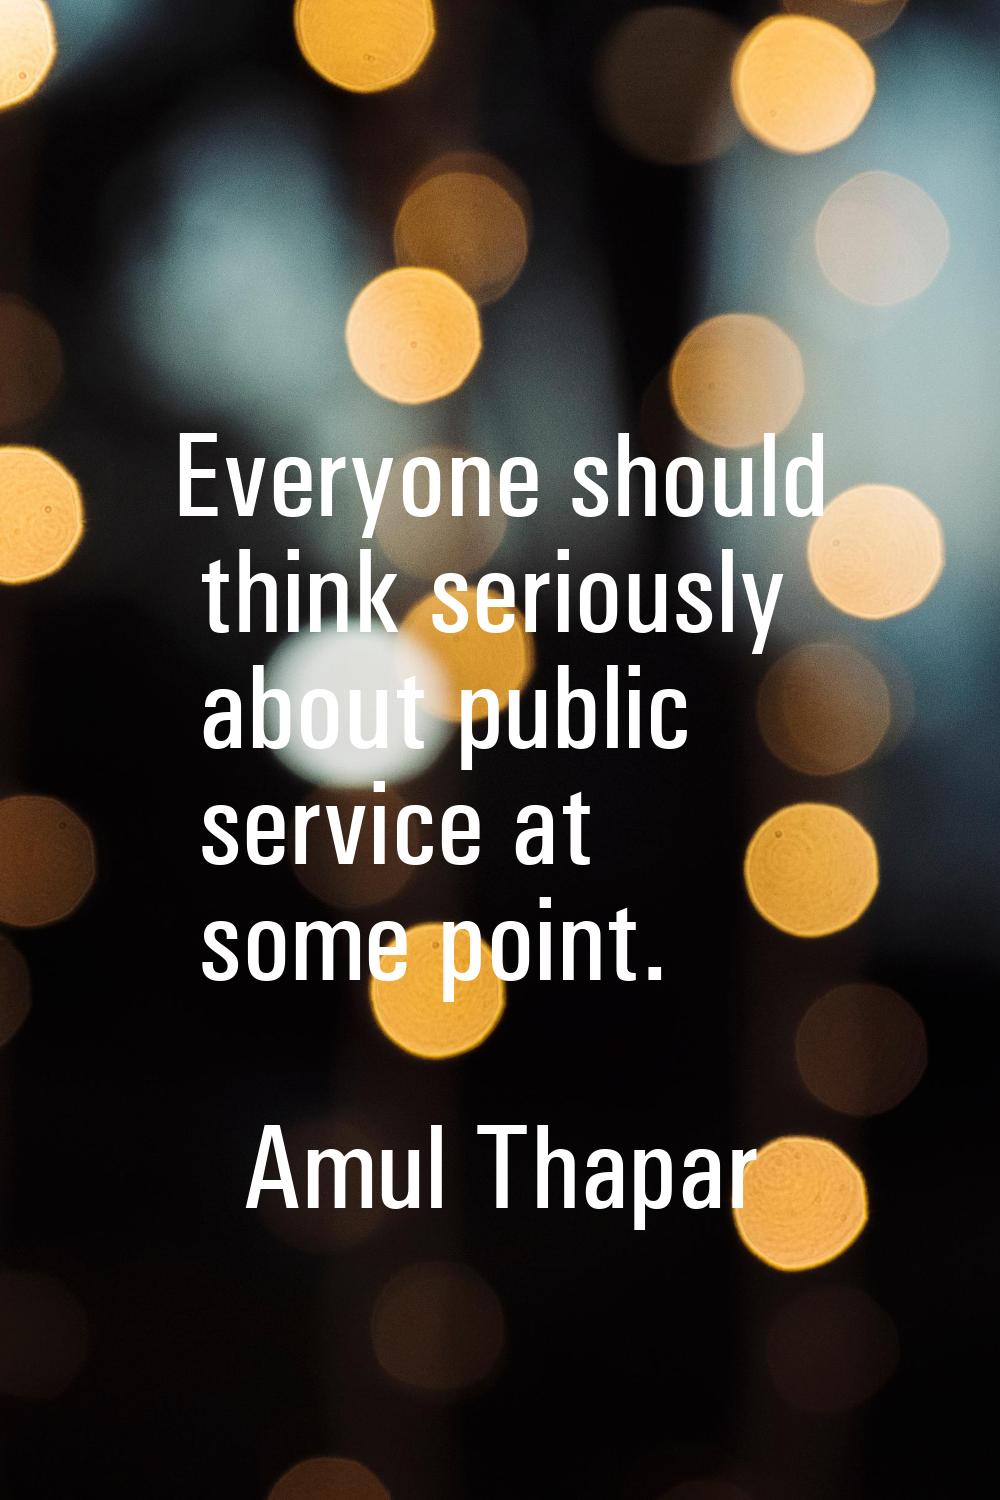 Everyone should think seriously about public service at some point.